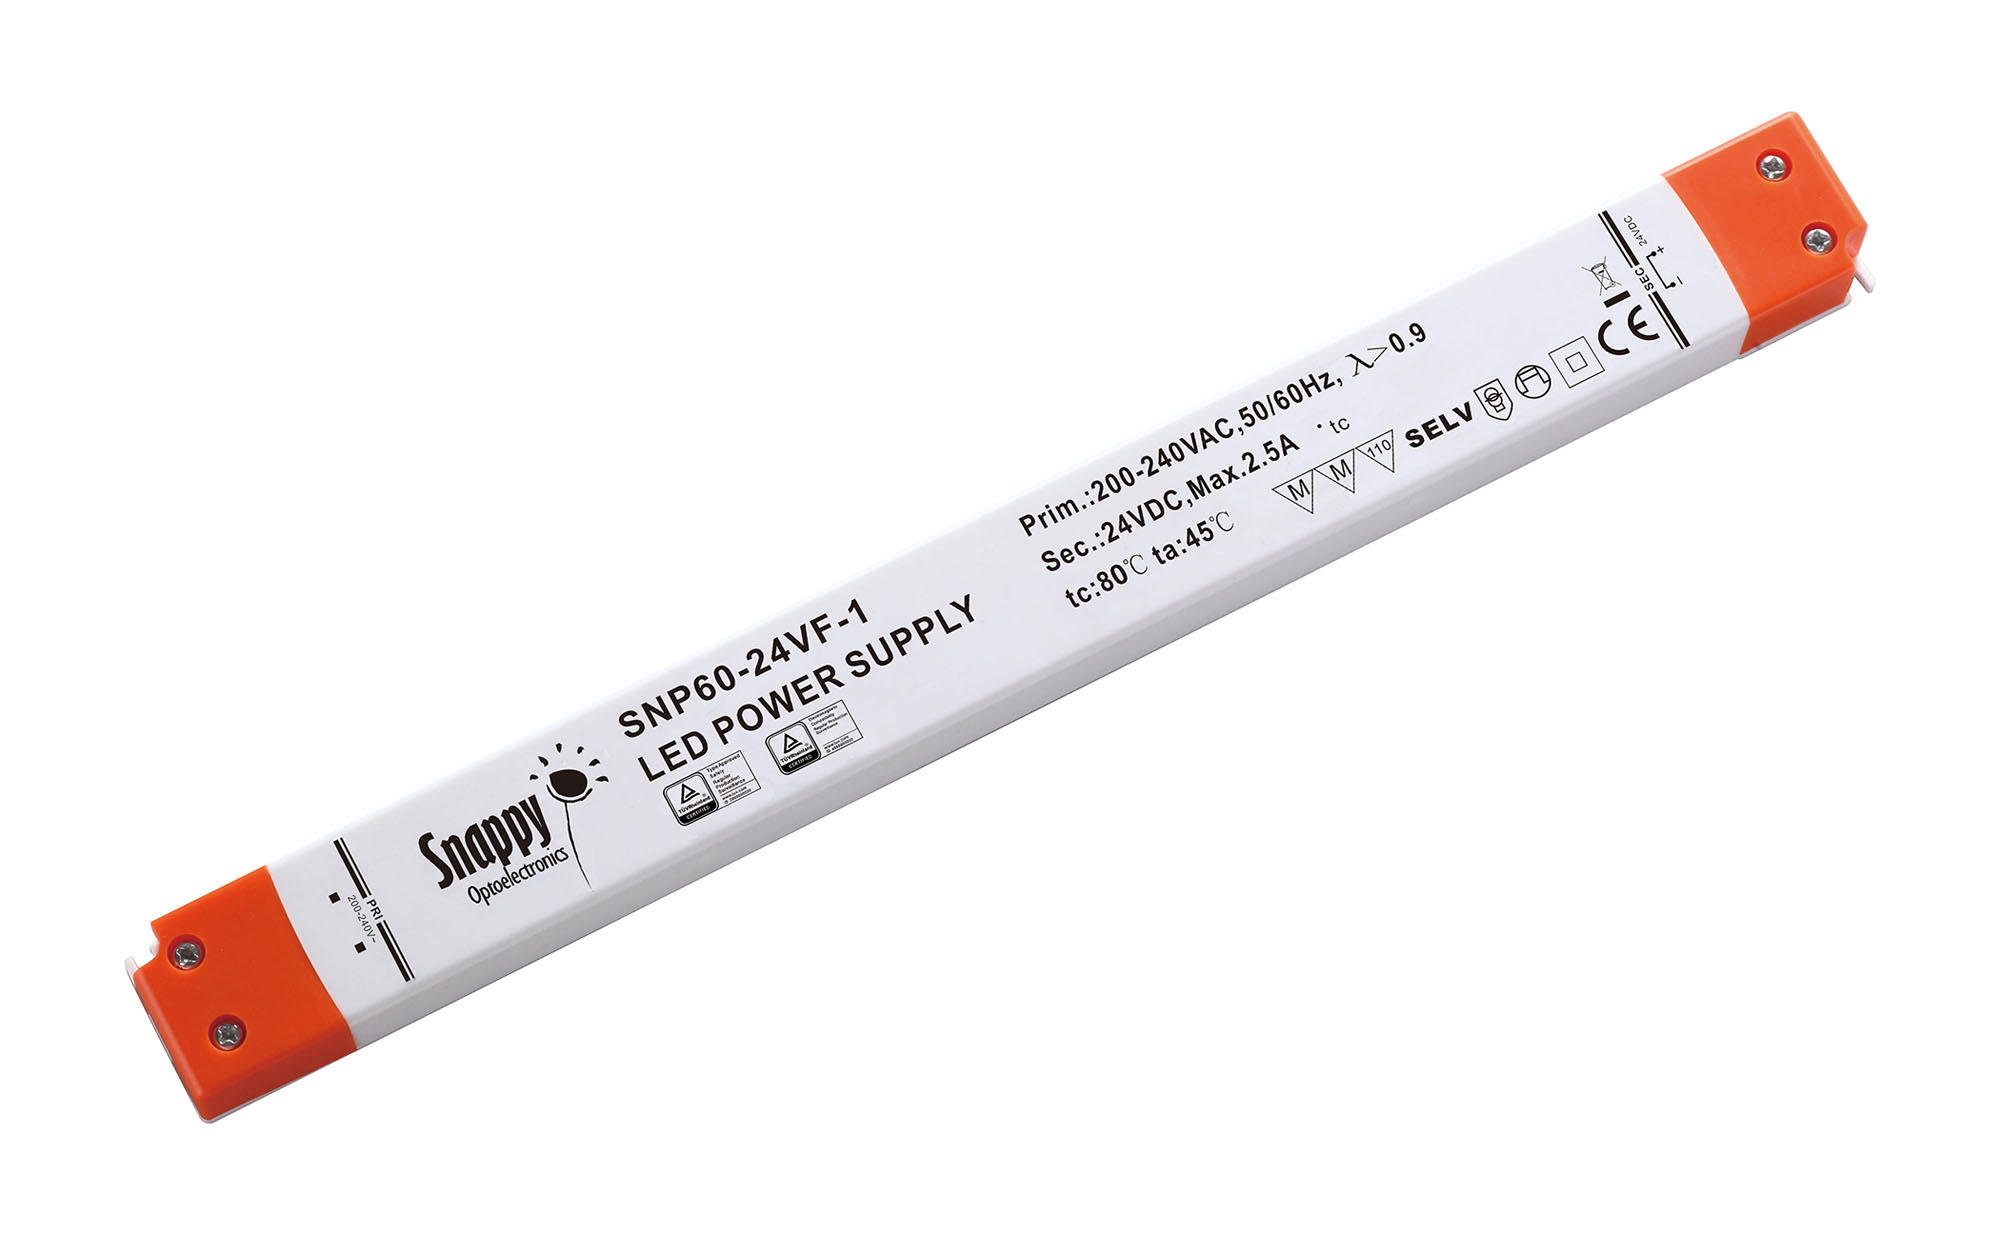 SNP60-24VF-1  60W Constant Voltage Non-Dimmable LED Driver 24VDC 2.5A IP20